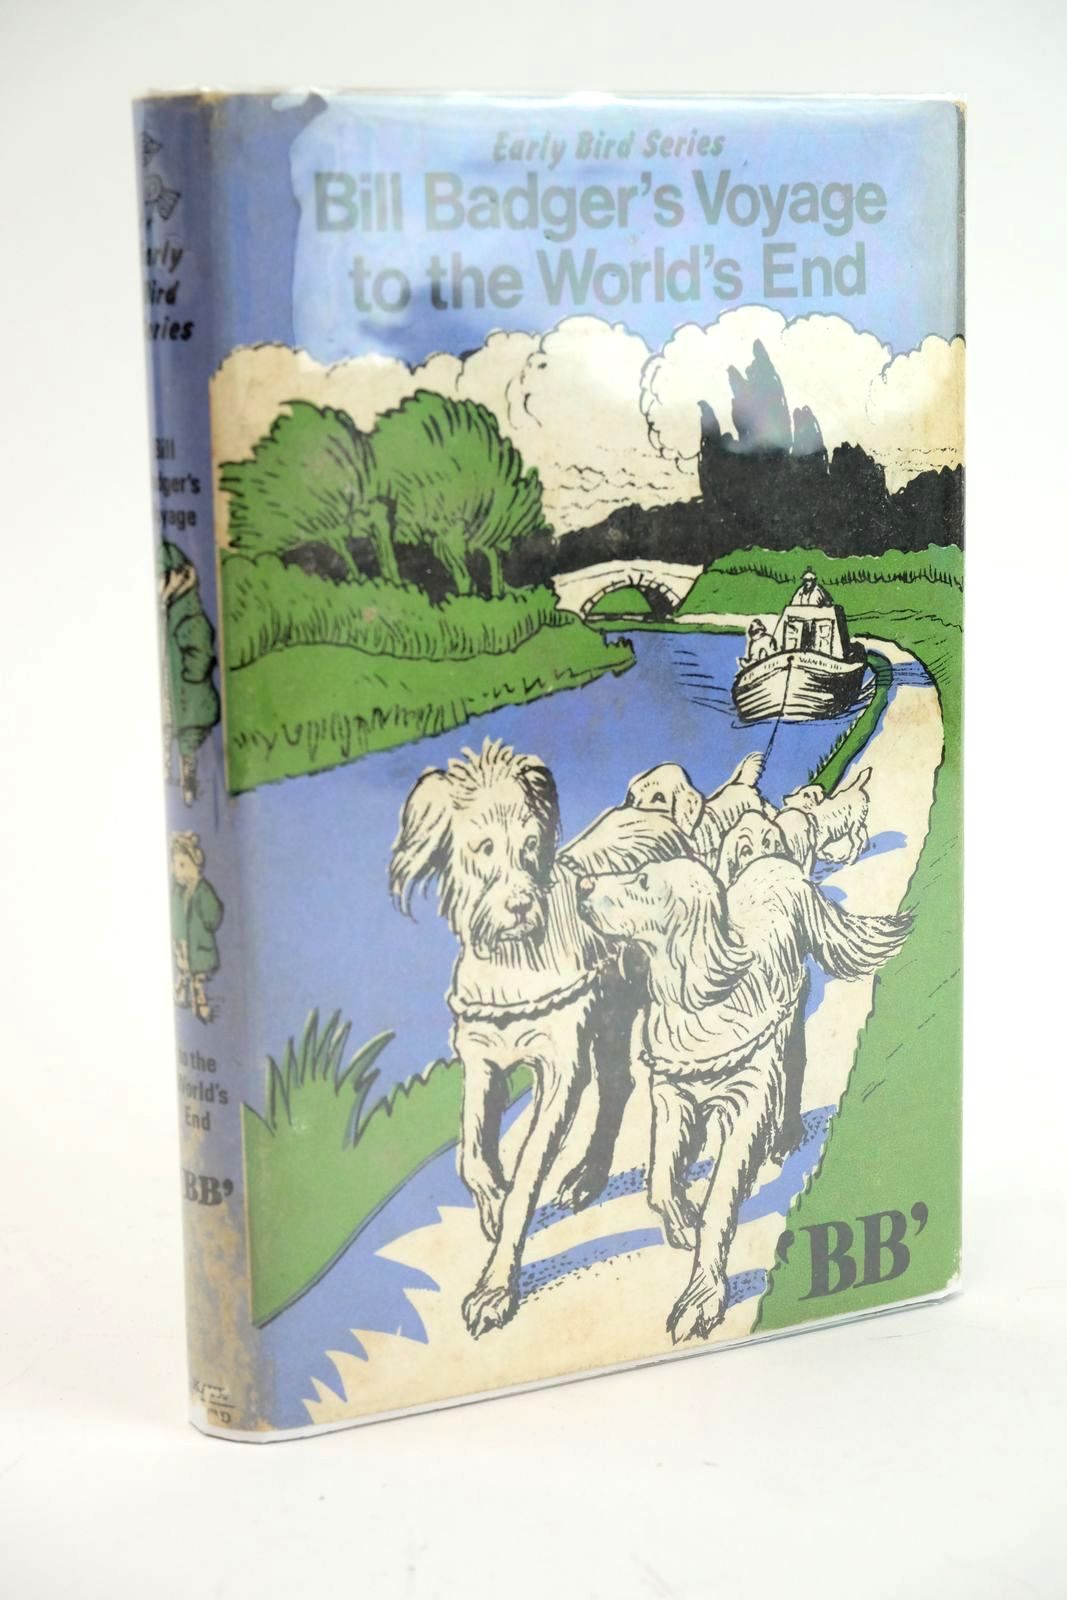 Photo of BILL BADGER'S VOYAGE TO THE WORLD'S END written by BB, illustrated by BB, published by Kaye &amp; Ward Ltd. (STOCK CODE: 1323395)  for sale by Stella & Rose's Books